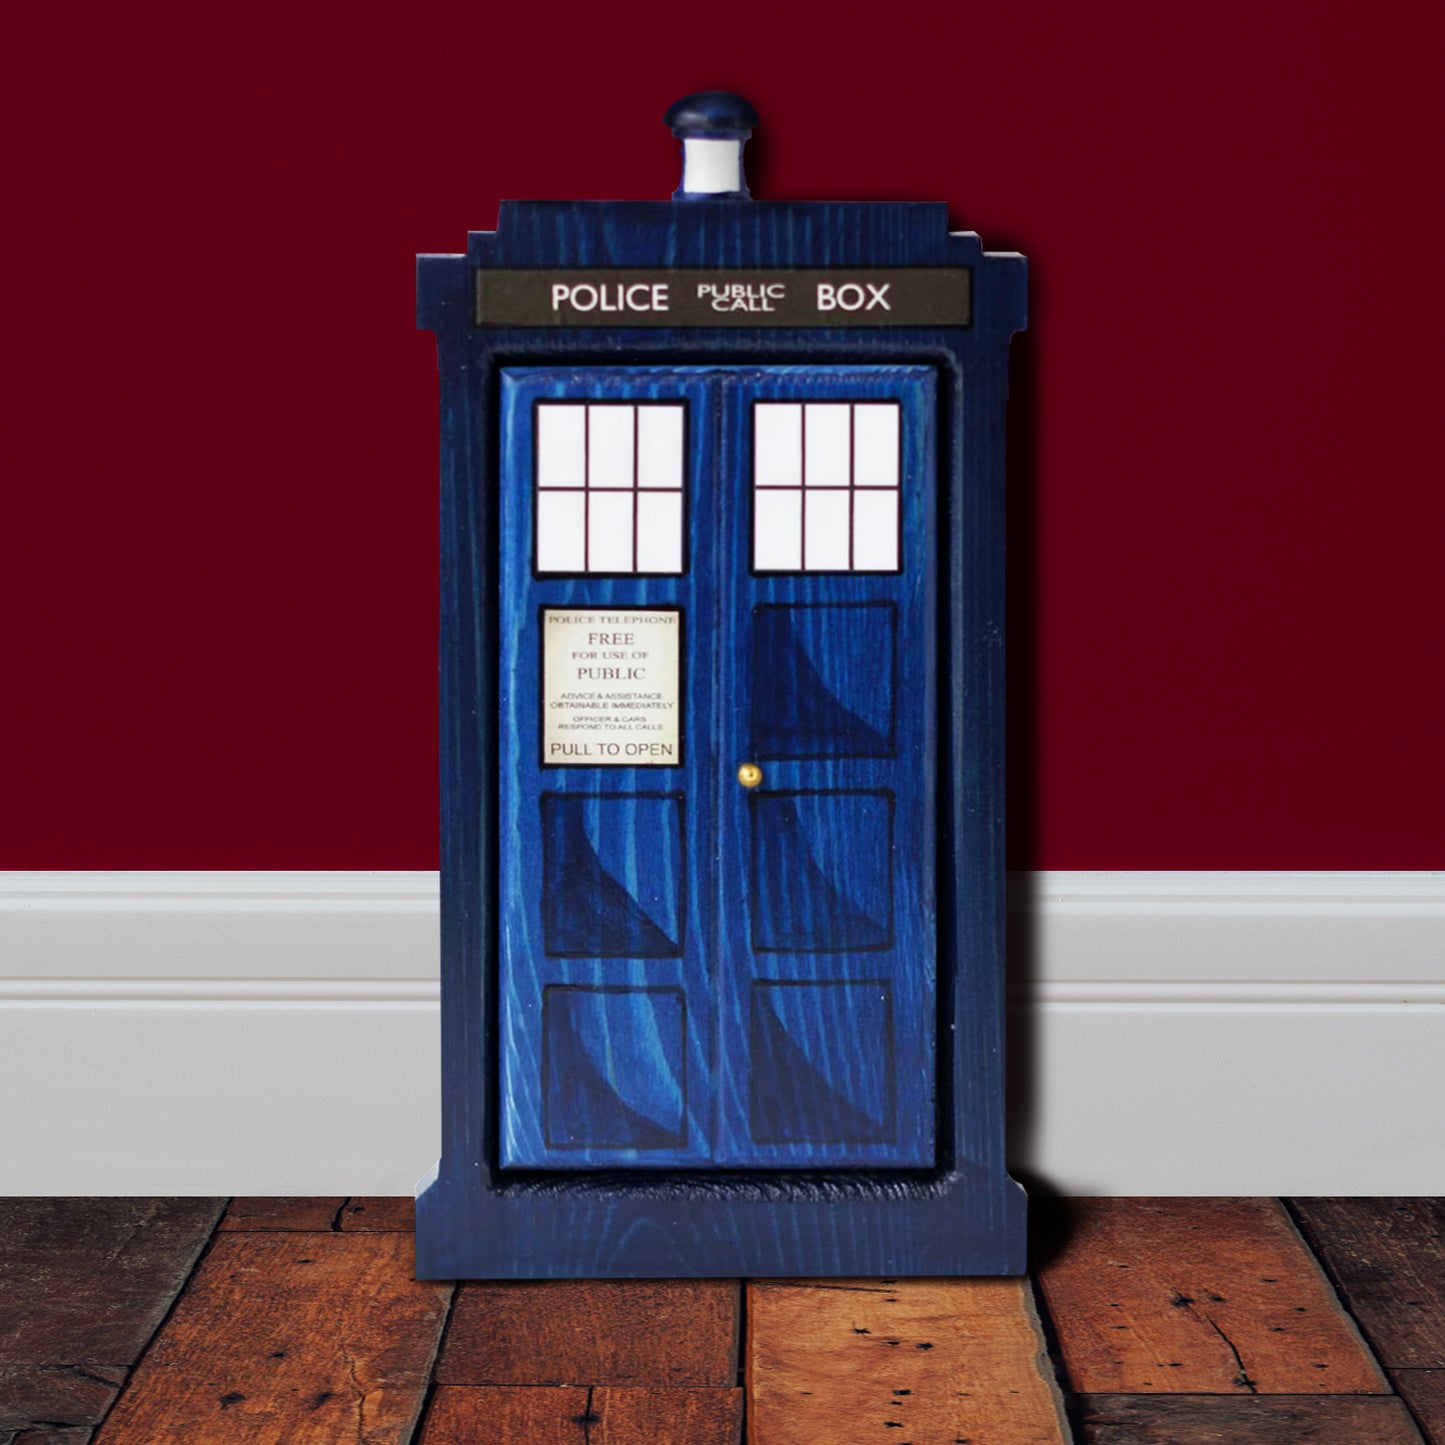 A front-facing rectangular wooden doorframe with a blue door, against a red wall and white baseboard. The door features the design of the TARDIS, including the POLICE BOX design, windows, and top light.